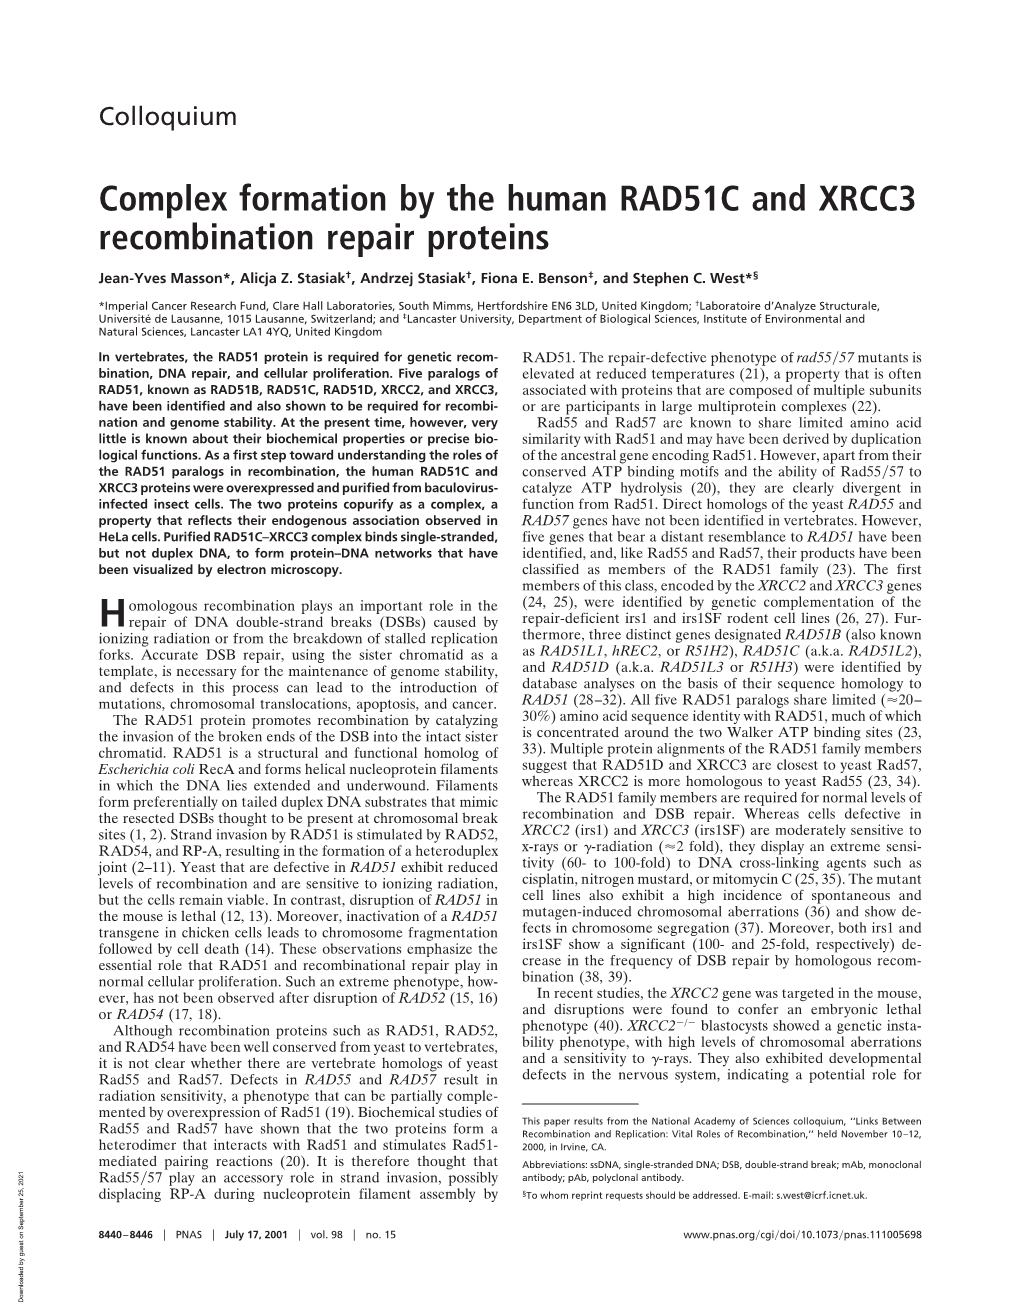 Complex Formation by the Human RAD51C and XRCC3 Recombination Repair Proteins